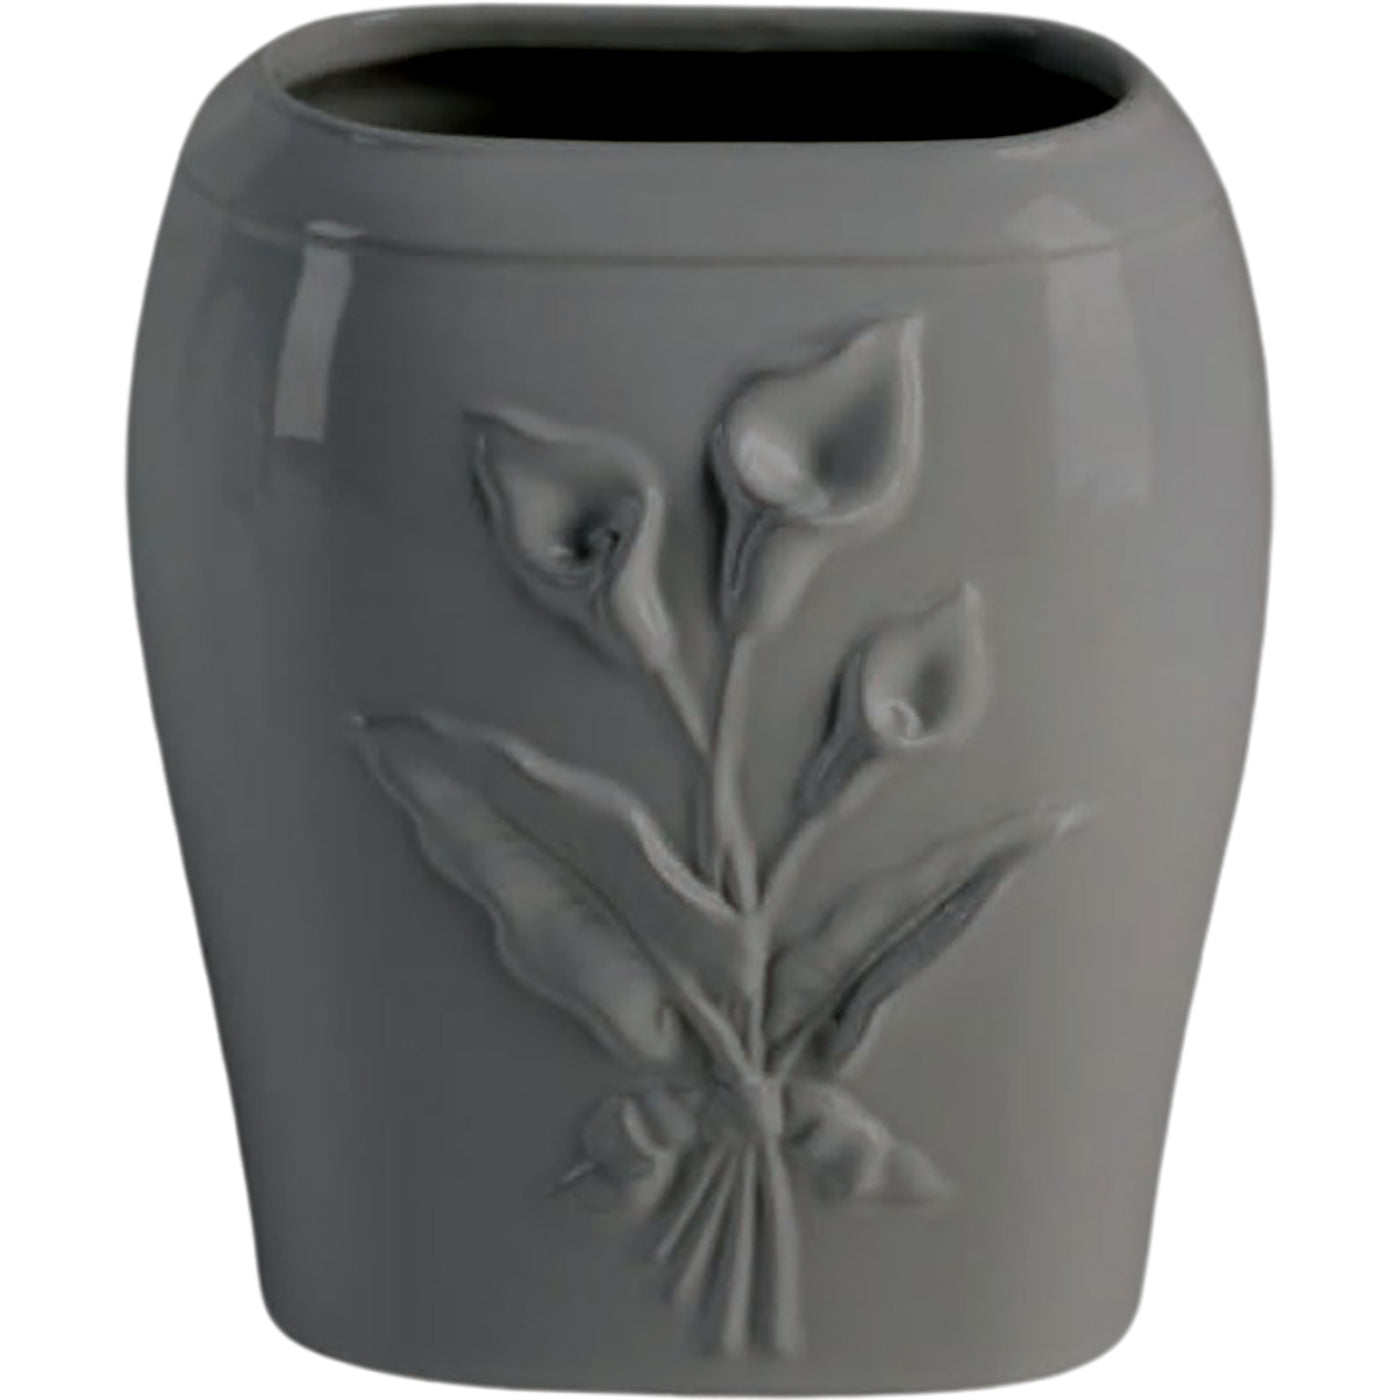 Rectangular grave vase Calla gray 19x17cm - 7.5x6.7in In gray porcelain, ground attached CAL160T/G